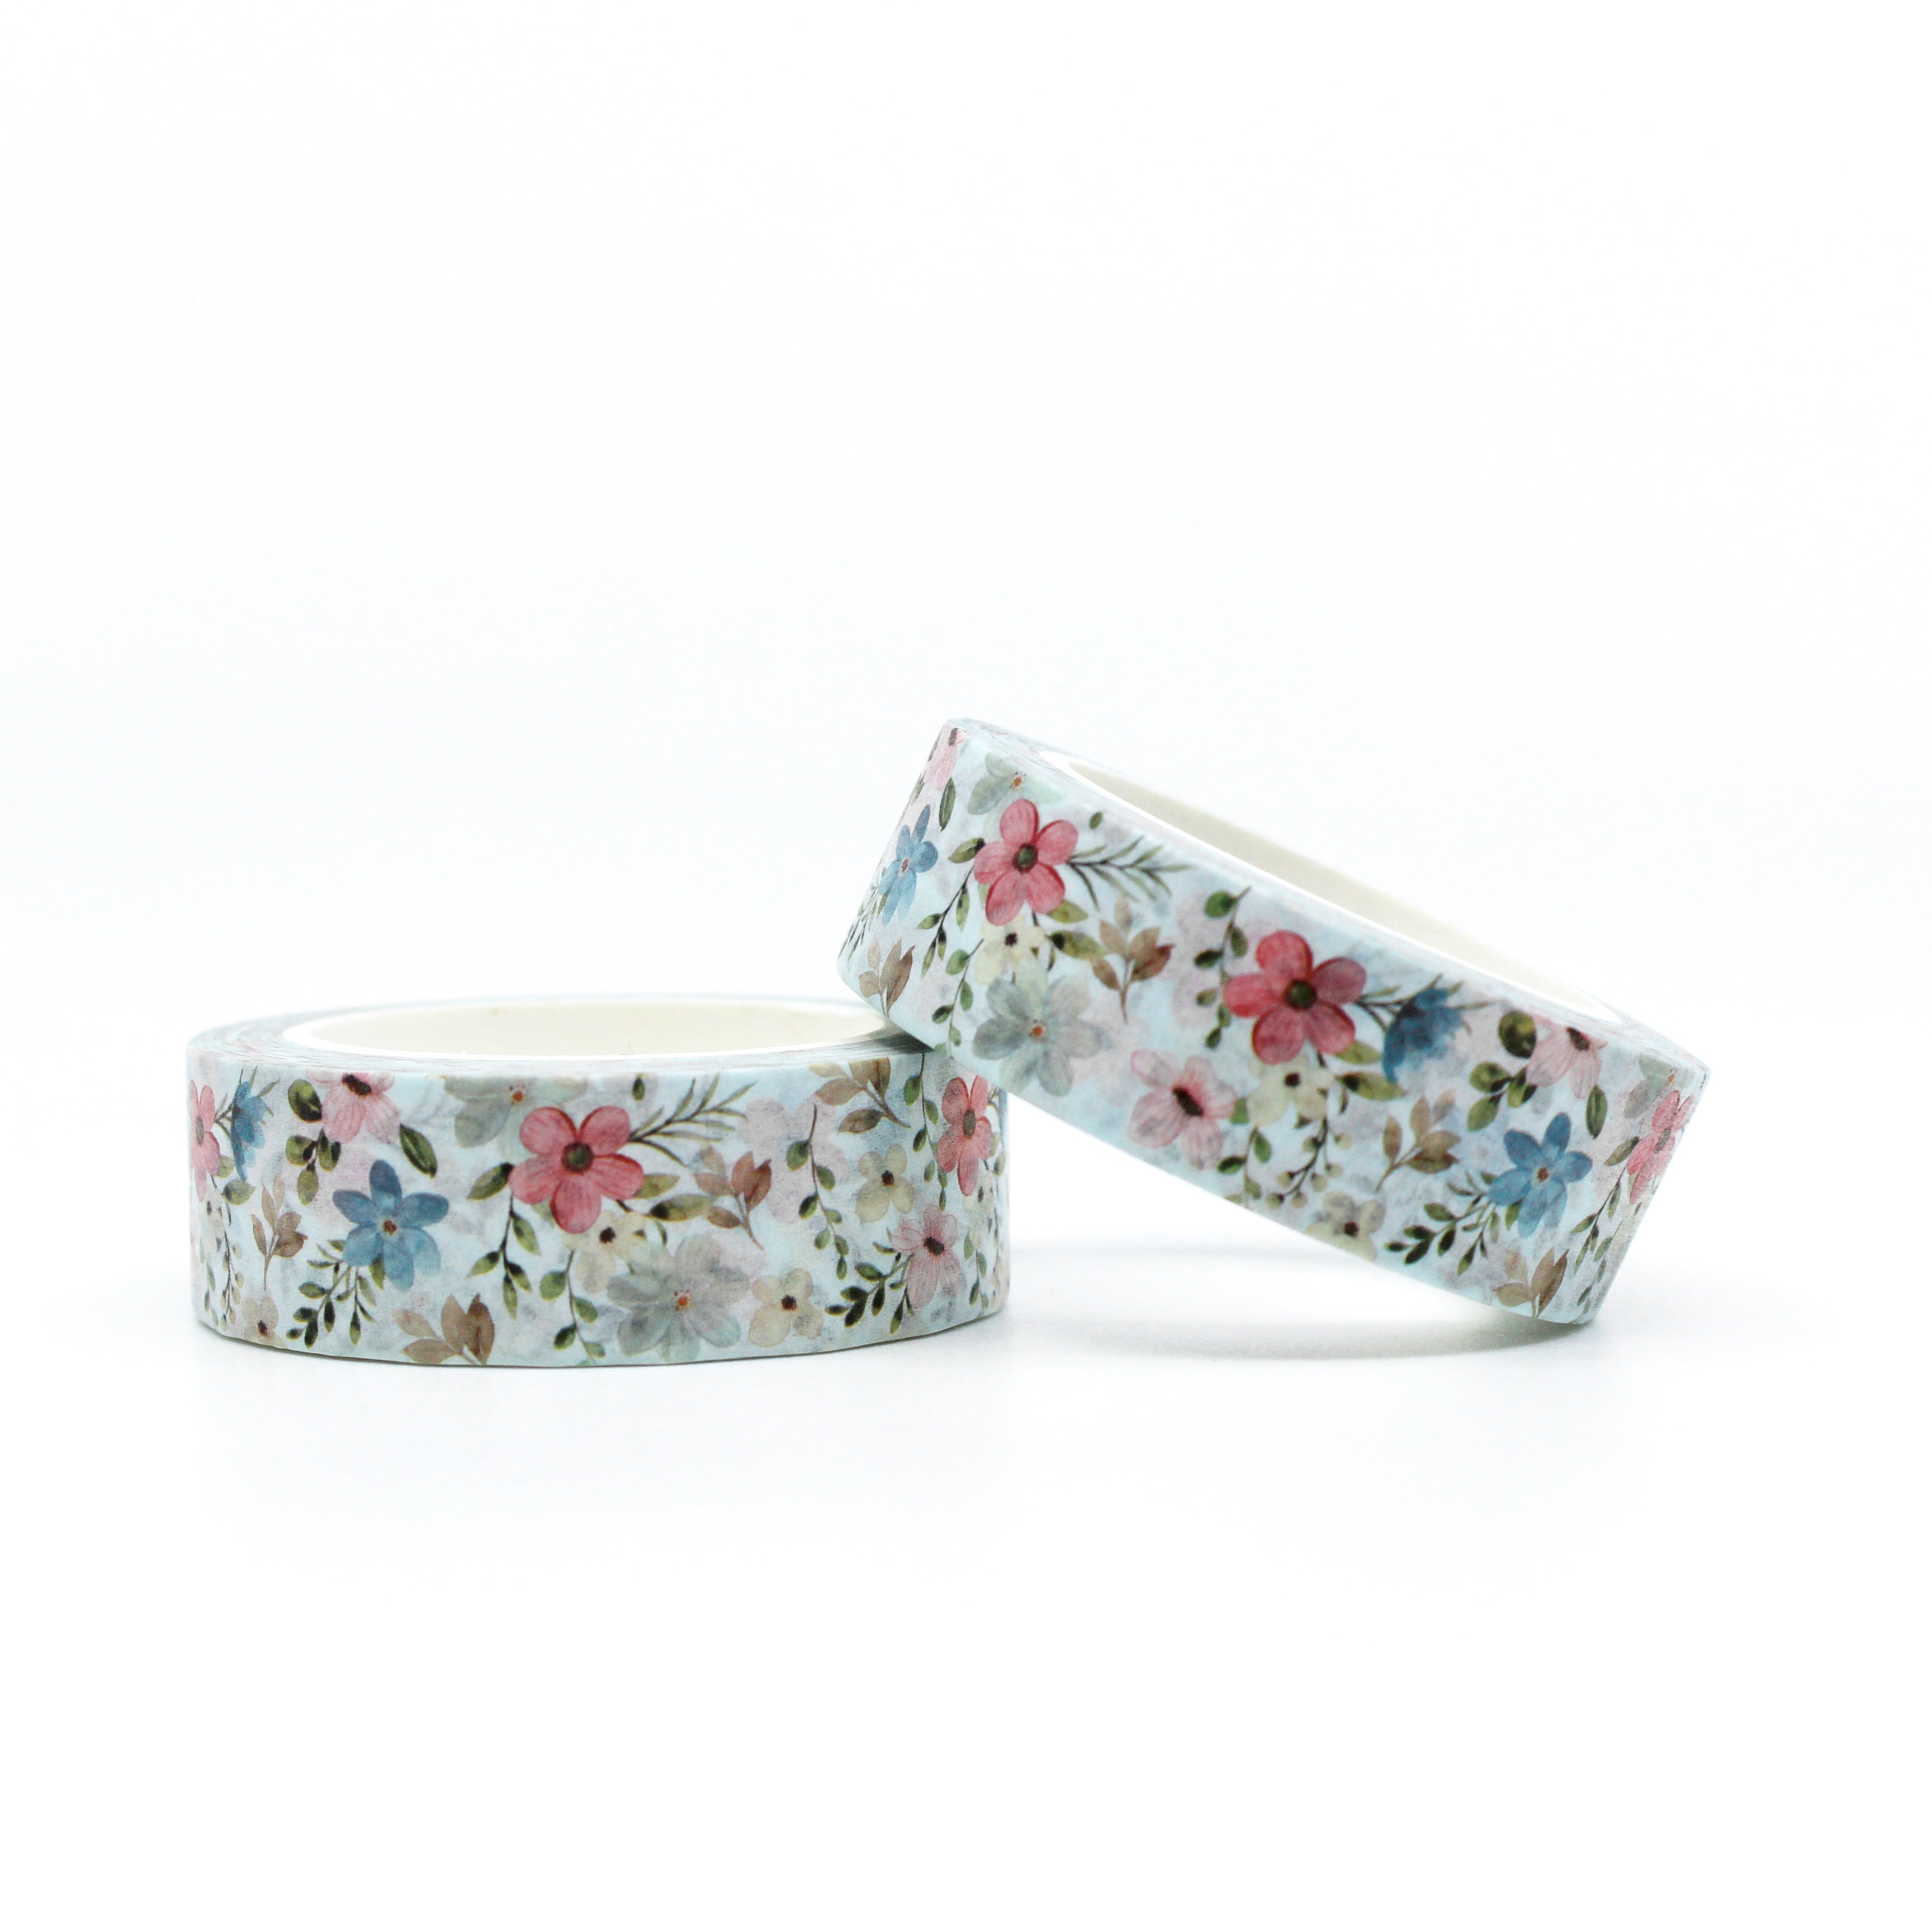  Spring Blue Floral Washi Tape: Bring the beauty of spring to your crafts with our Blue Floral Washi Tape. Featuring delicate blue flowers on a white background, this tape is perfect for adding a touch of elegance to your projects. Whether you're scrapbooking memories, decorating cards, or embellishing journals, this tape is sure to inspire your creativity. This tape is sold at BBB Supplies Craft Shop.